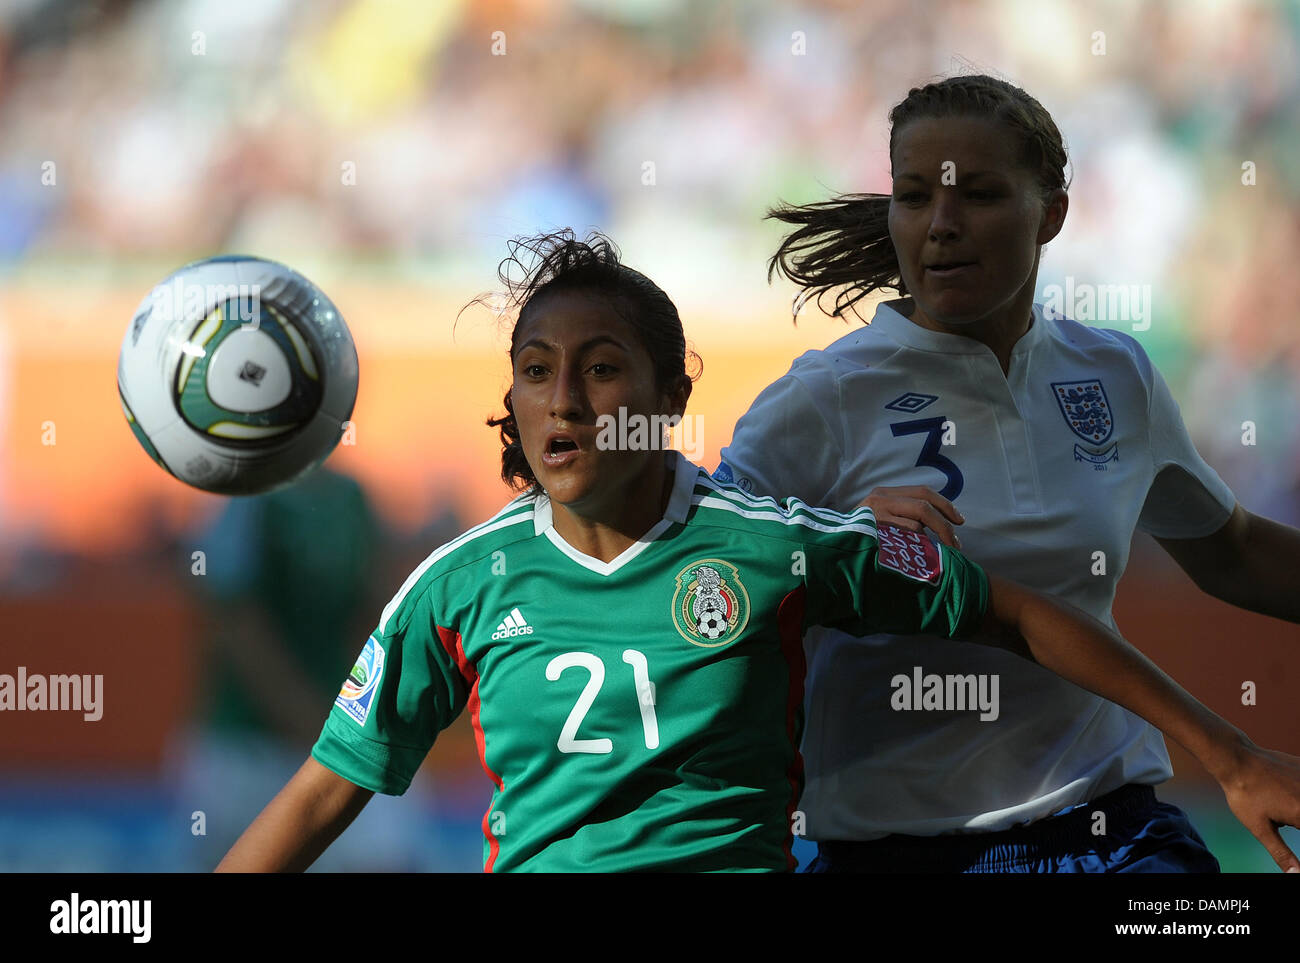 Sandra Stephany Mayor of Mexico (L) and Rachel Unitt of England fight for the ball during the Group B match Mexico against England of FIFA Women's World Cup soccer tournament at the Arena Im Allerpark in Wolfsburg, Germany, 27 June 2011. Foto: Peter Steffen dpa/lni Stock Photo